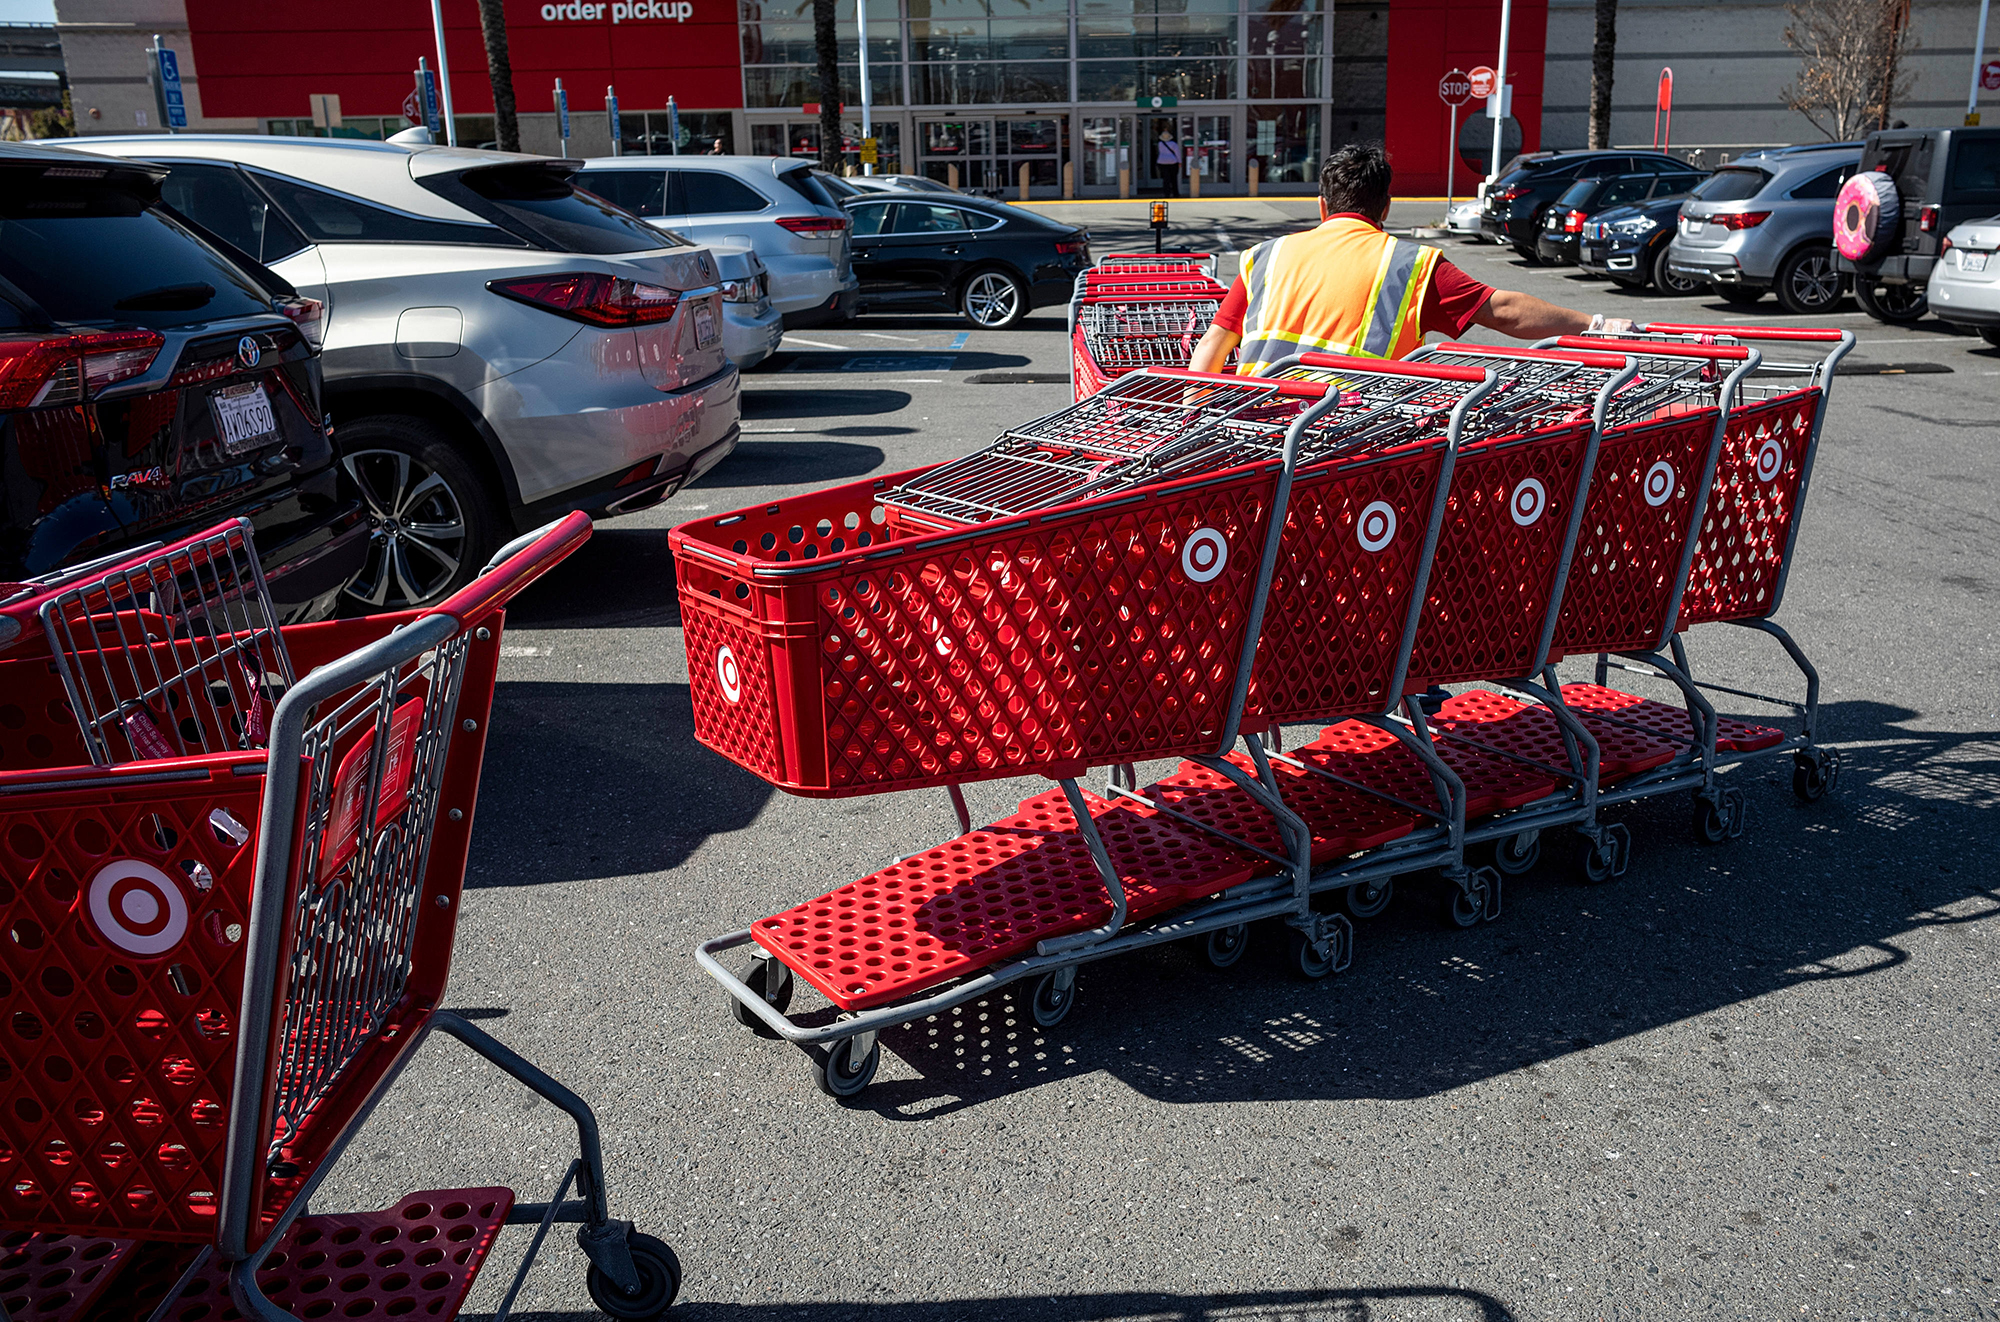 A worker collects shopping carts from the parking lot of a Target Corp. store in Emeryville, Califo...